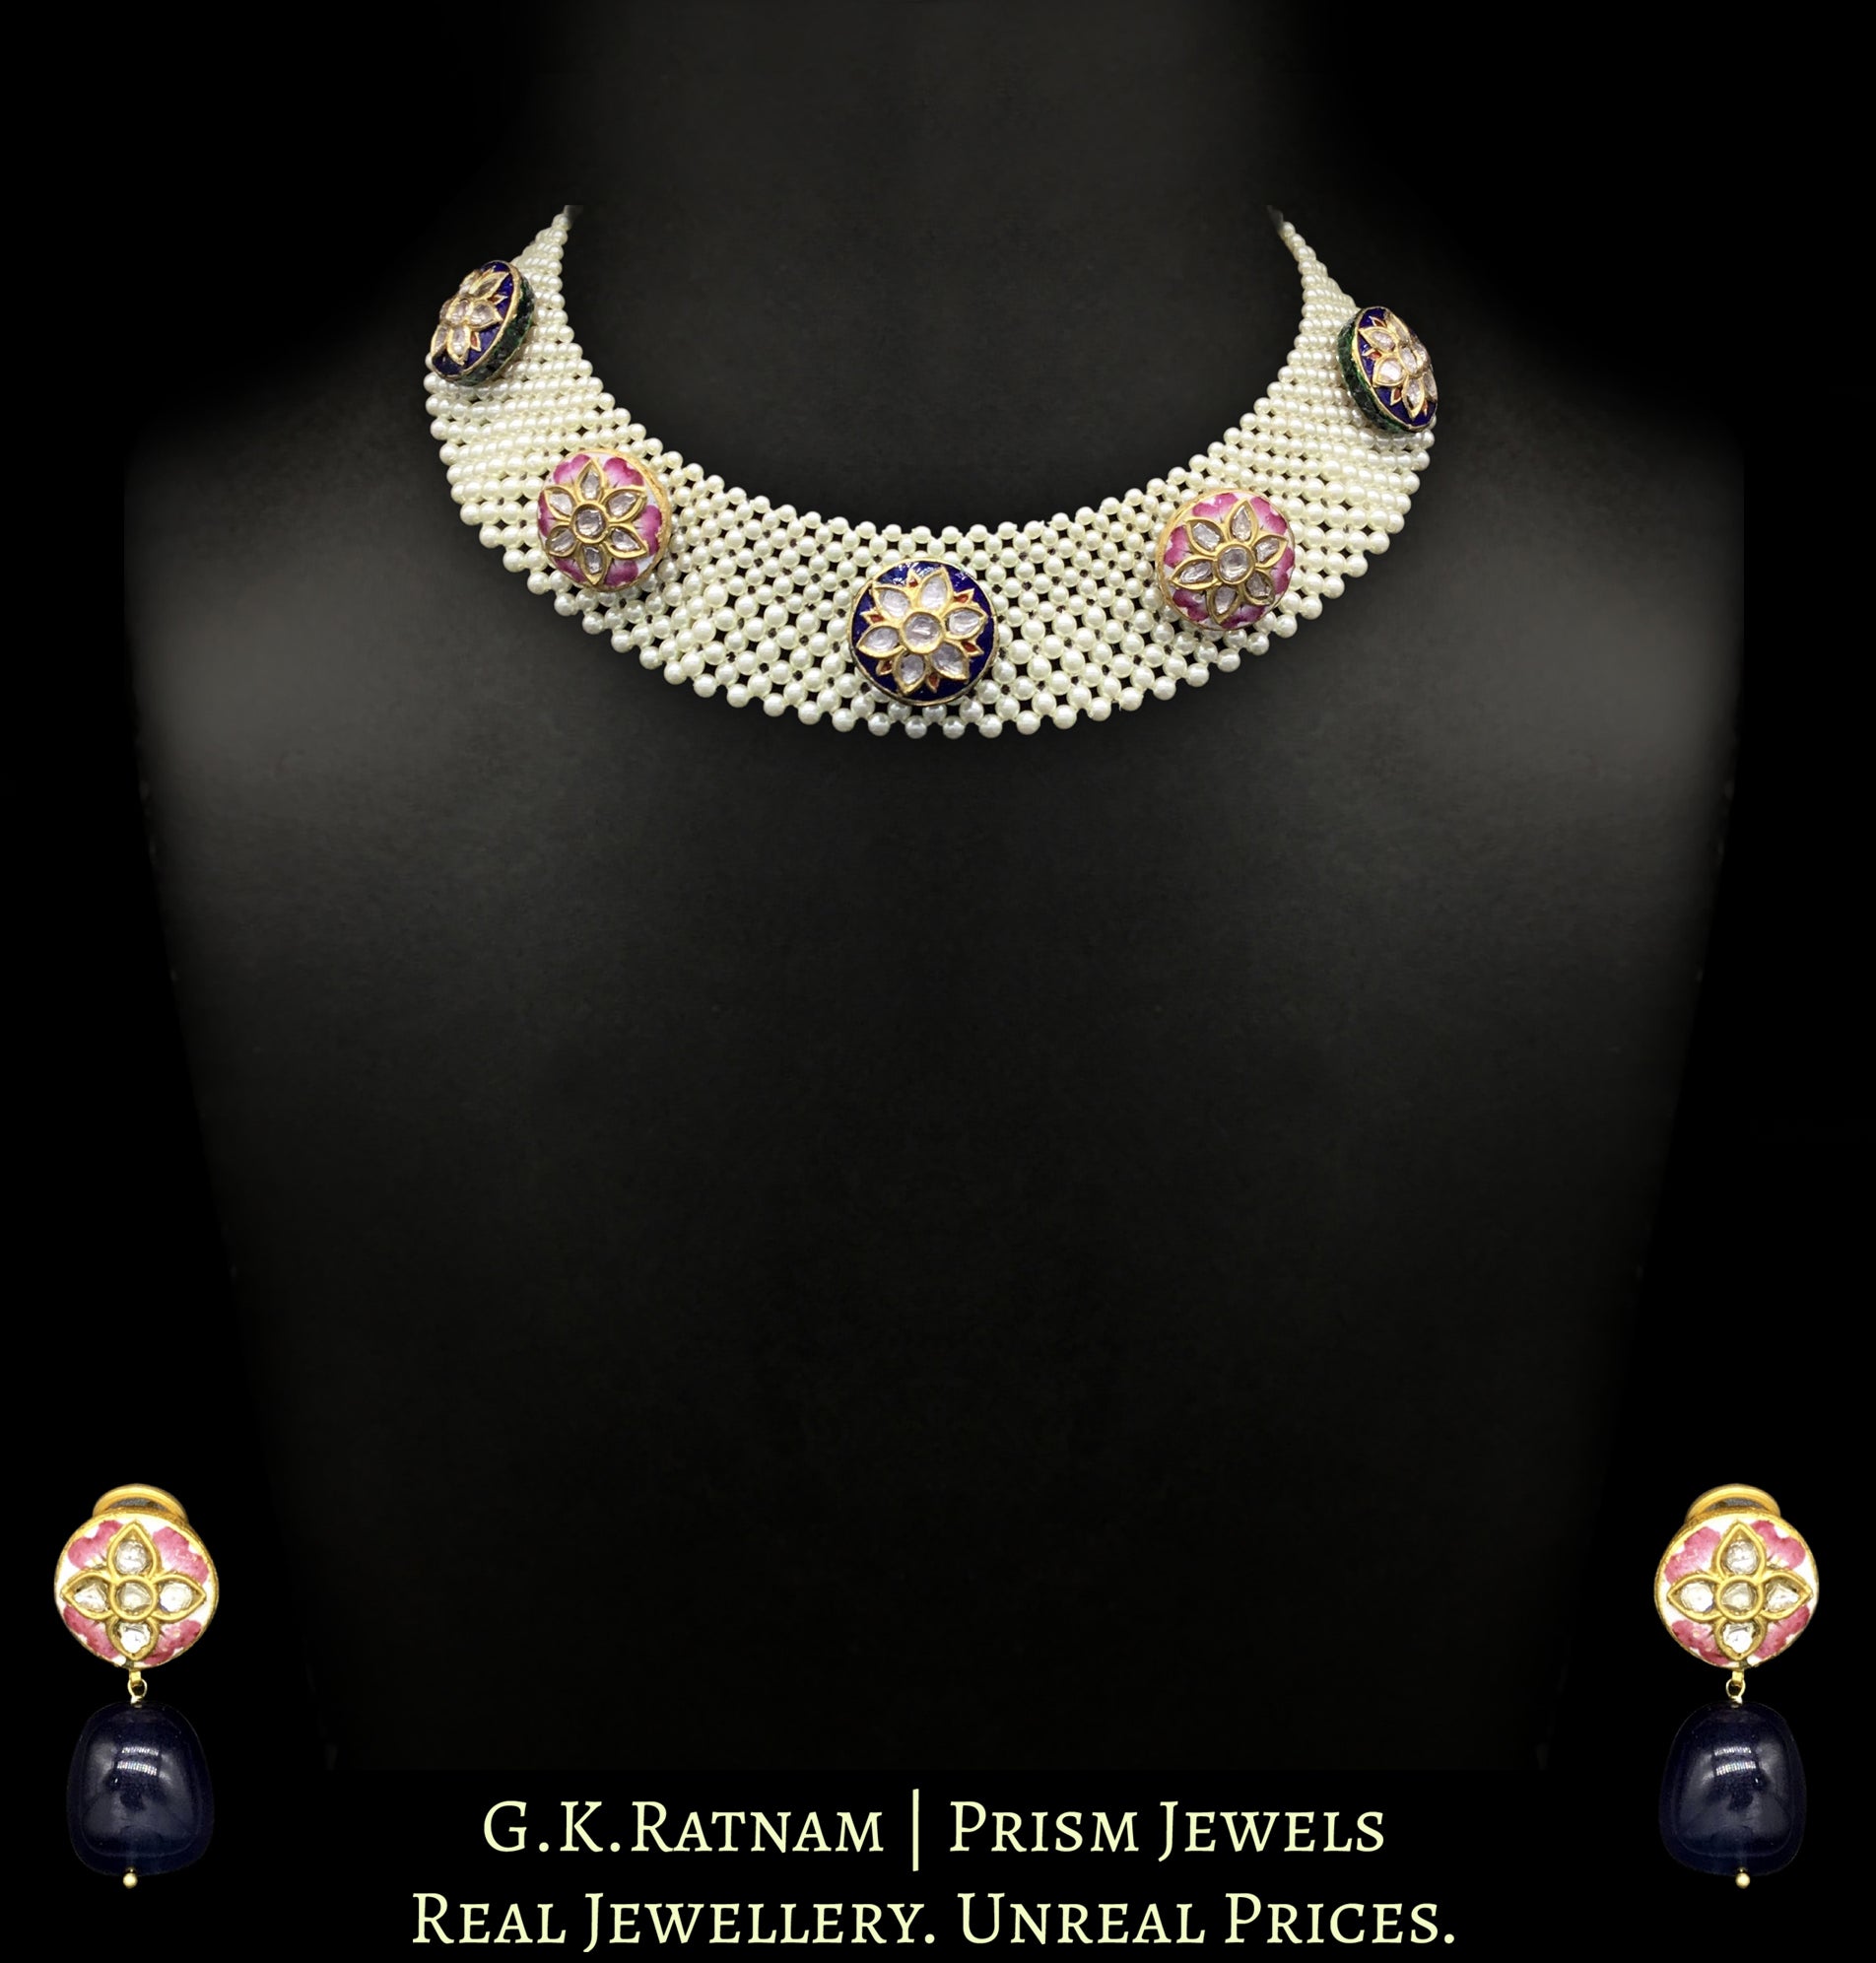 23k Gold and Diamond Polki Necklace Set with blue and pink meenakari rounds strung intricately in a pearl mesh